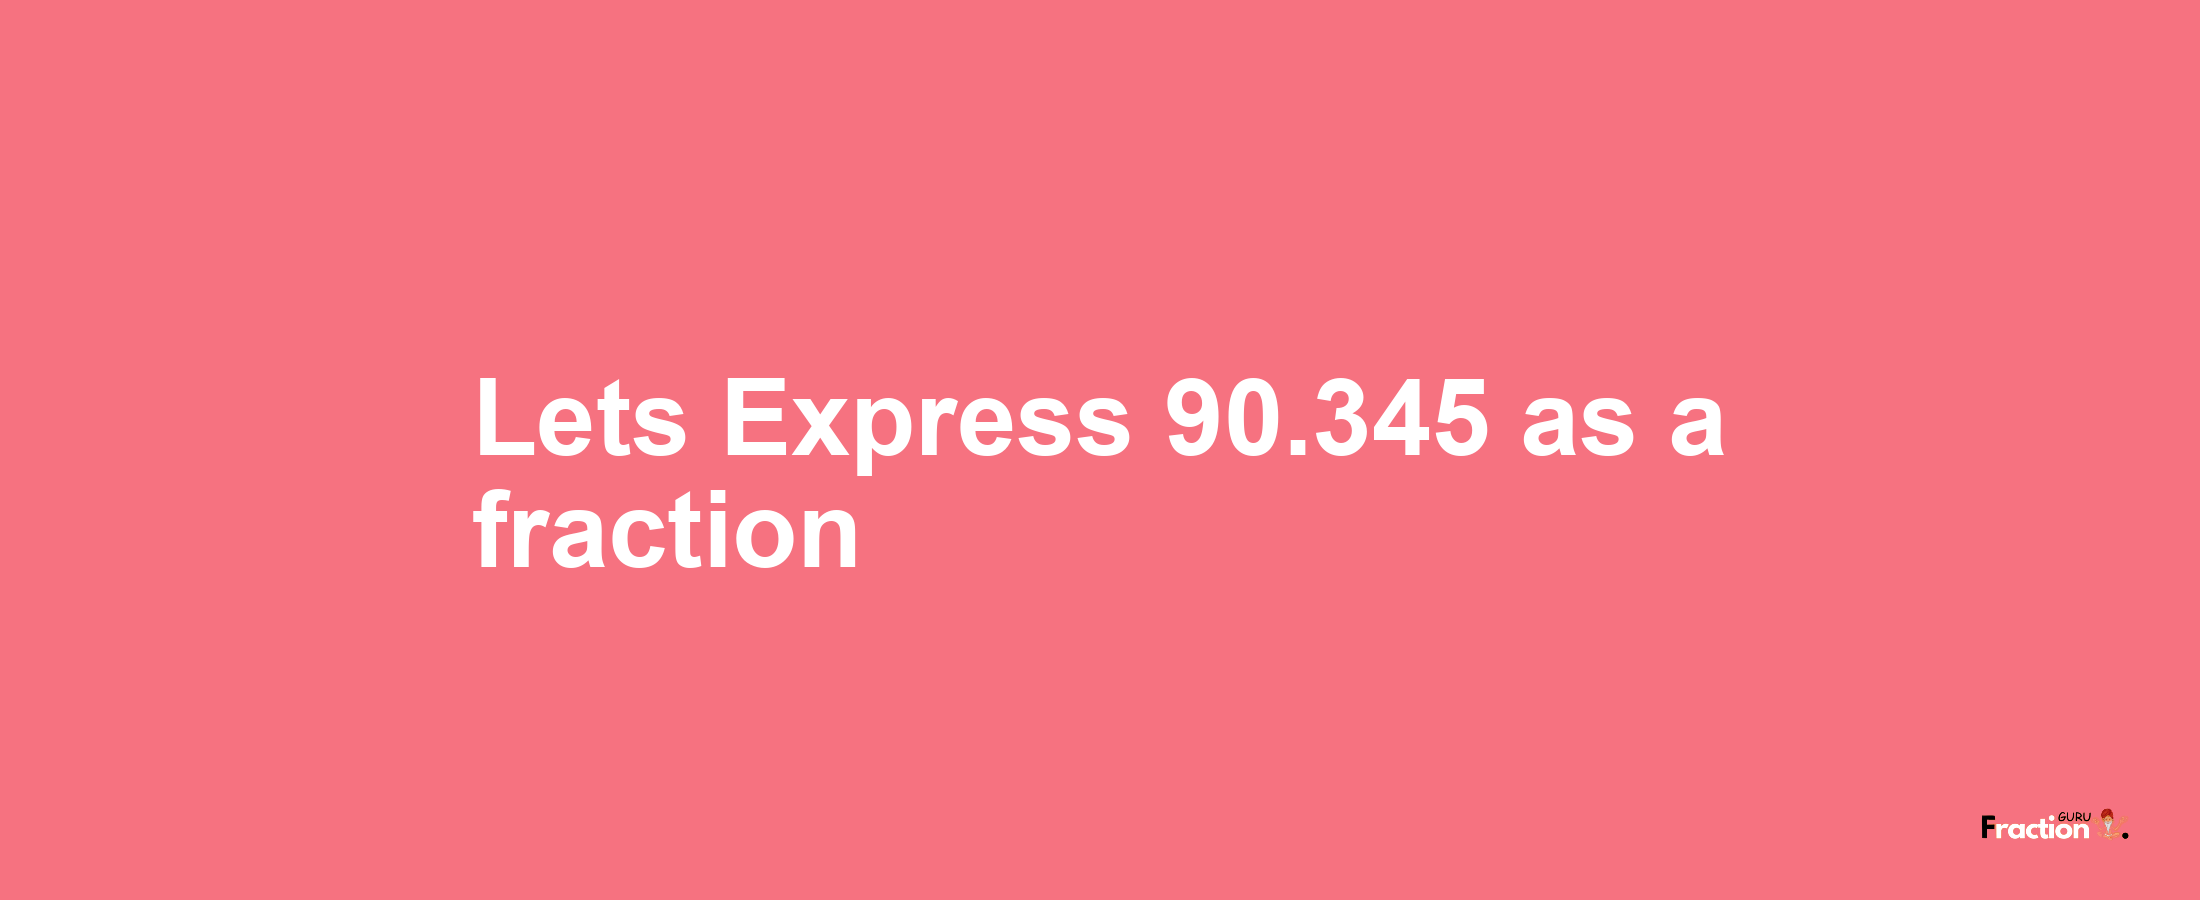 Lets Express 90.345 as afraction